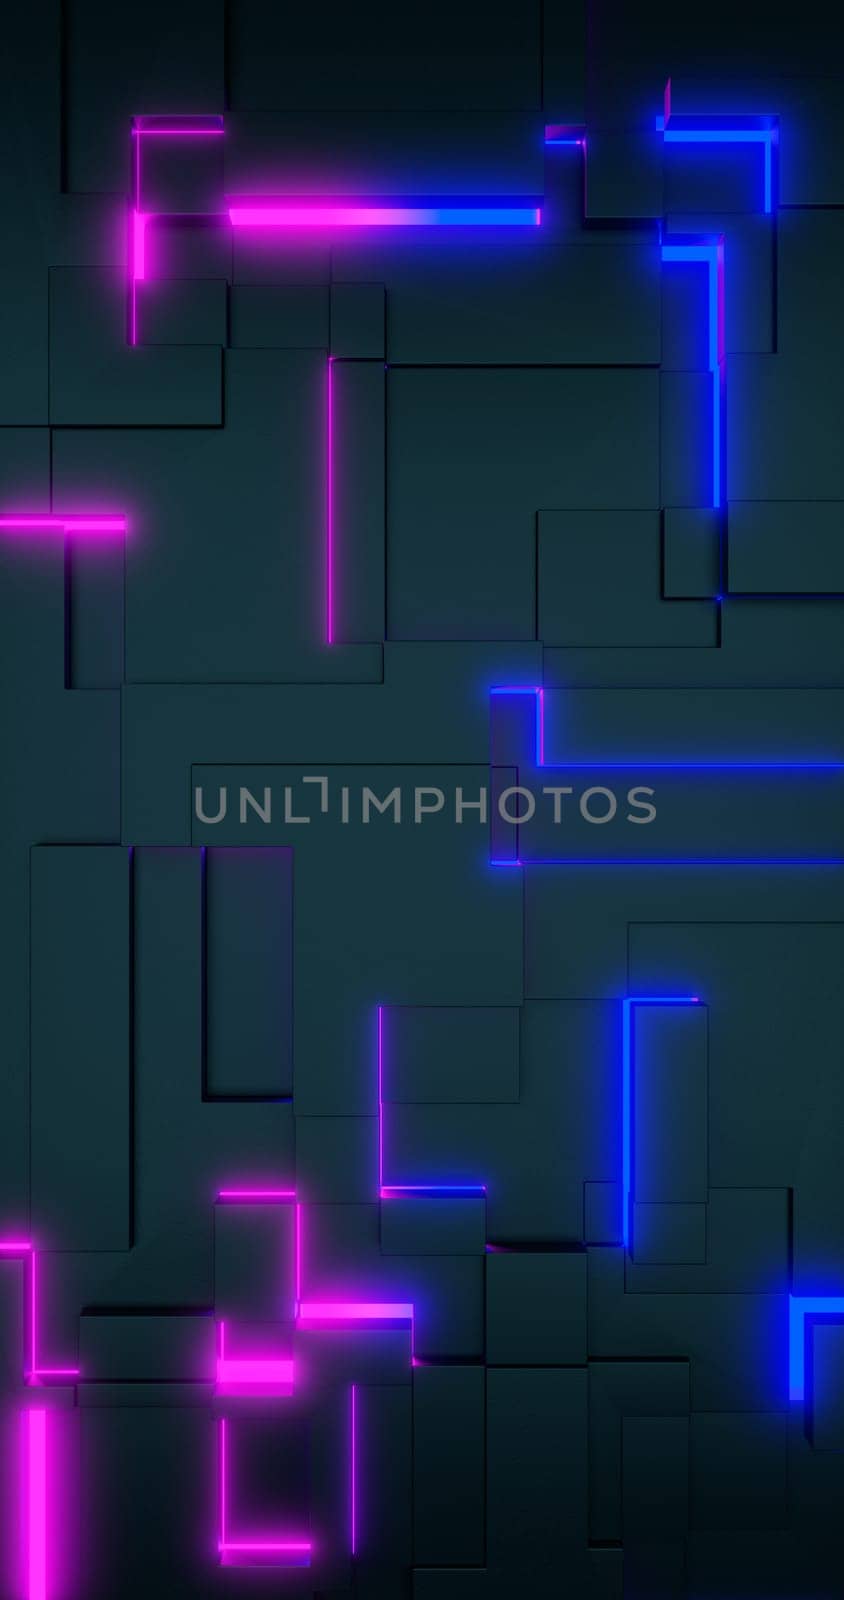 3d rendering. Geometric background with bright pink and blue neon elements. Phone background